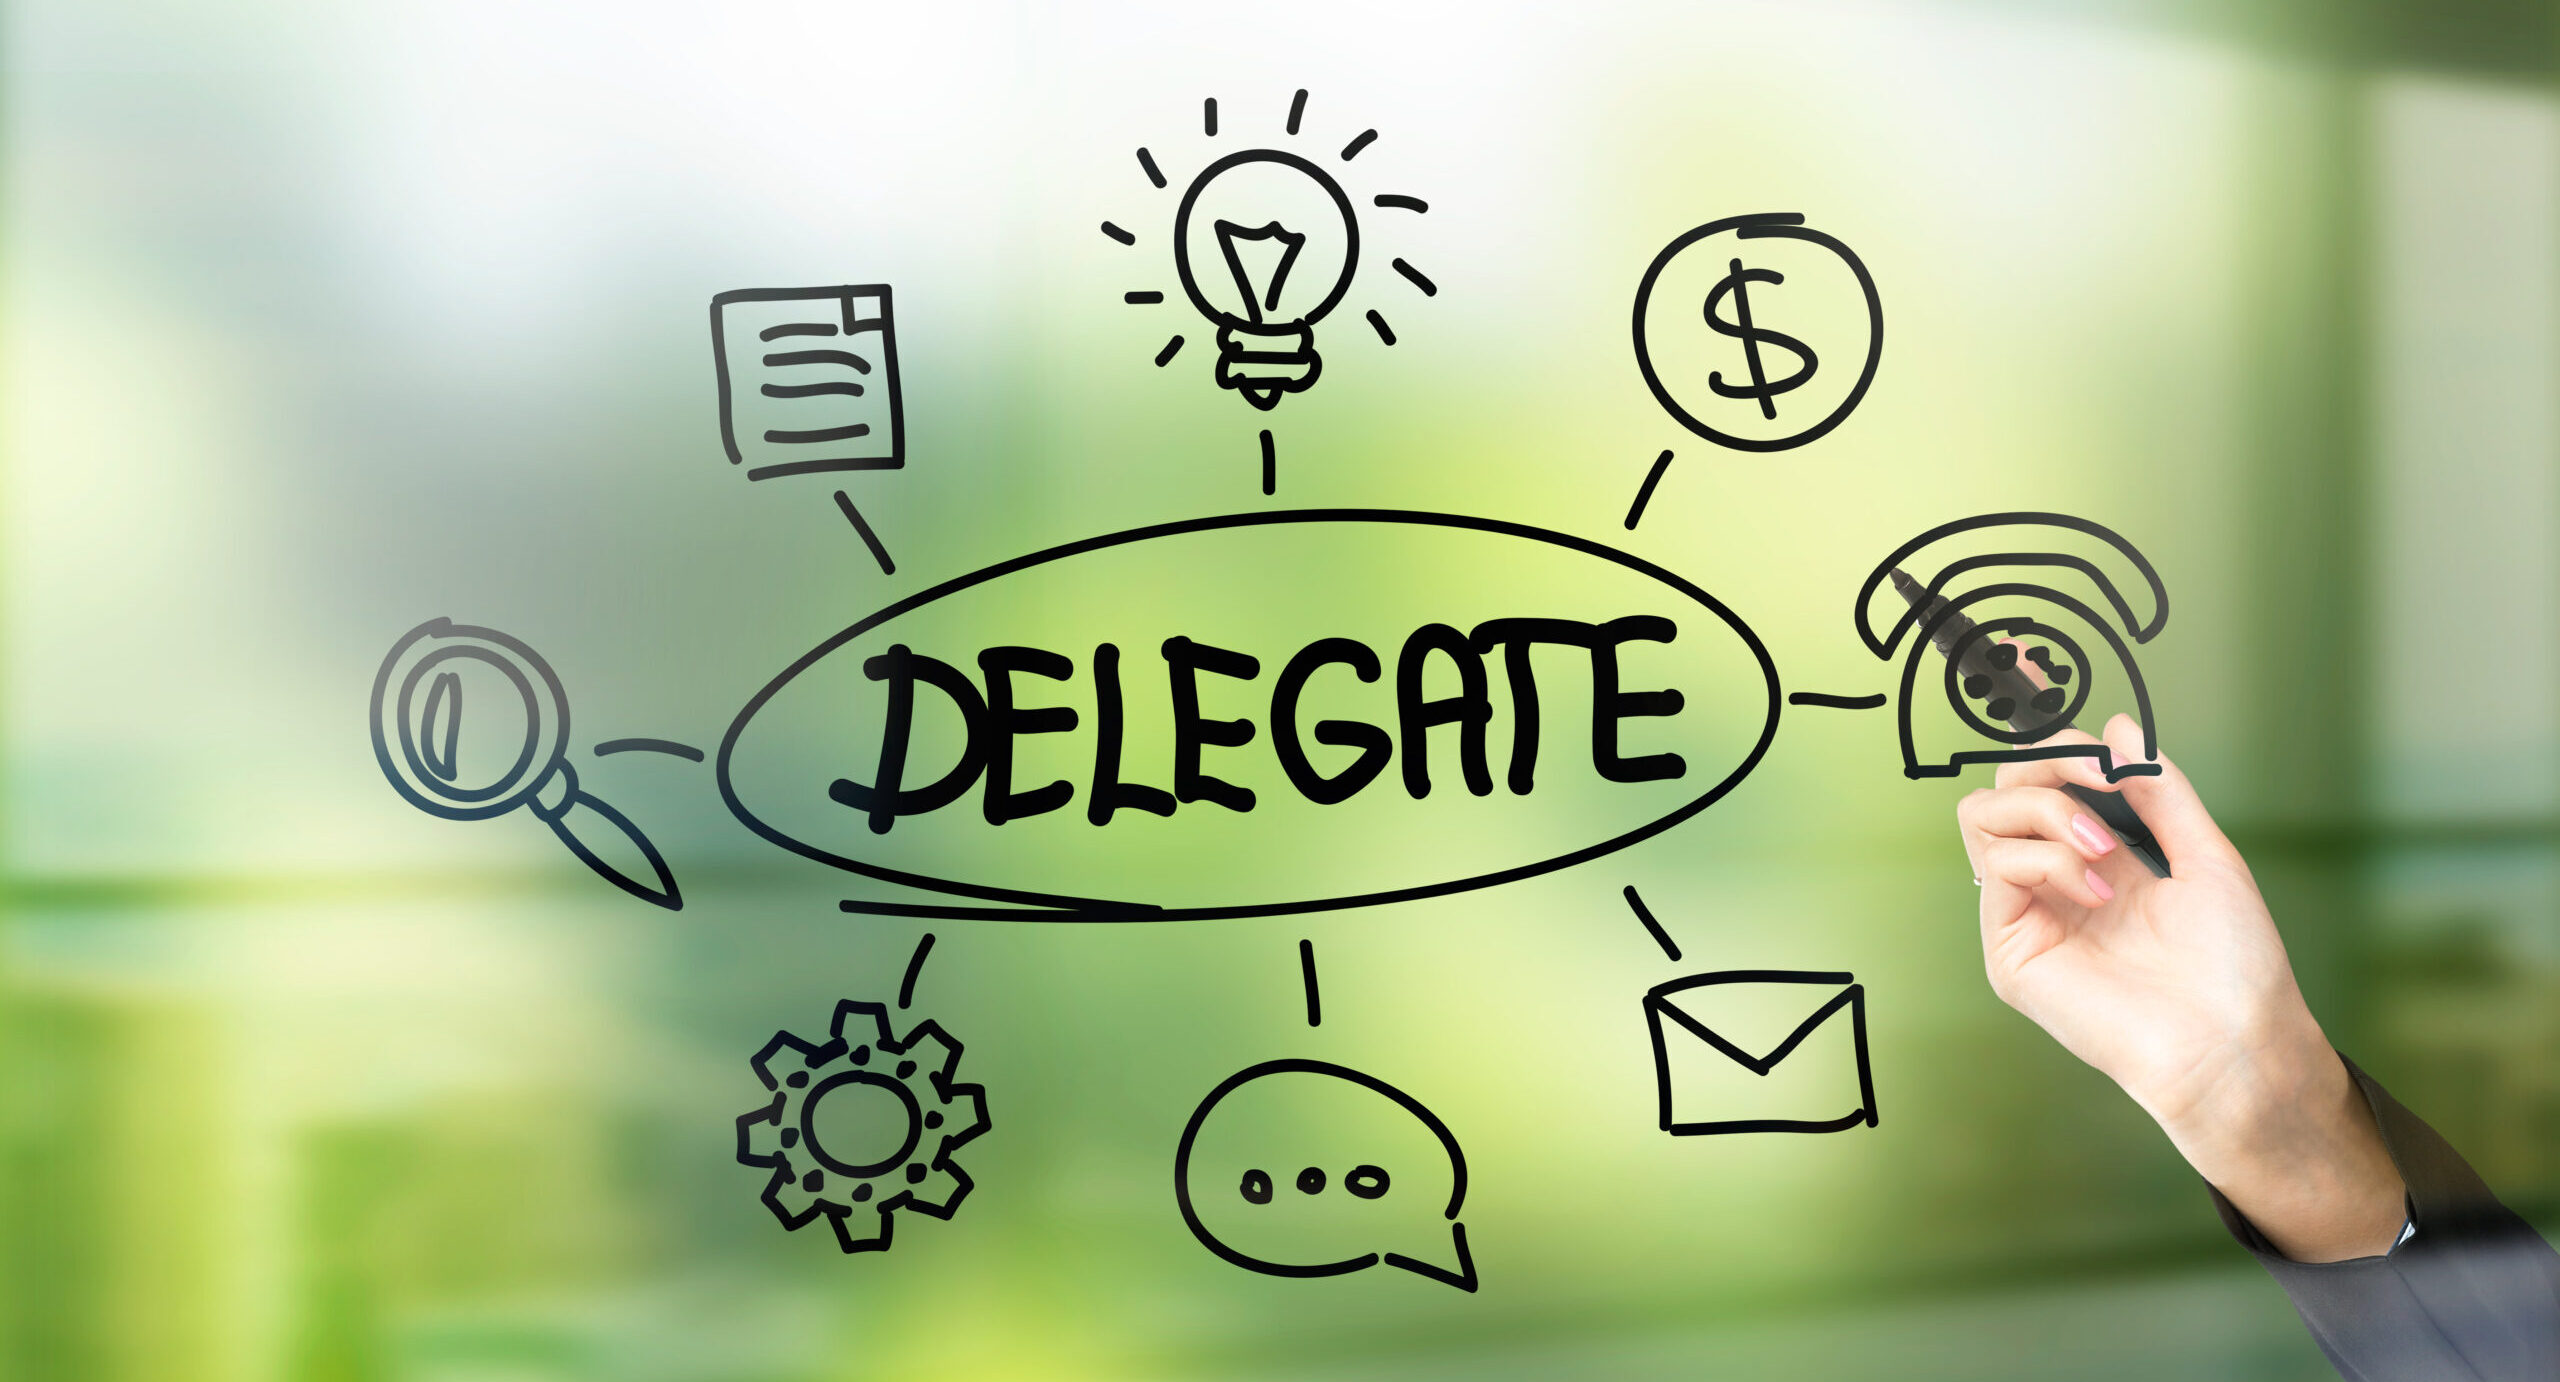 The word delegate with a hand-drawn circle around it connected to images things that can be delegated including money, phone calls, emails, chats, settings, searches, documents and lightbulb (ideas)